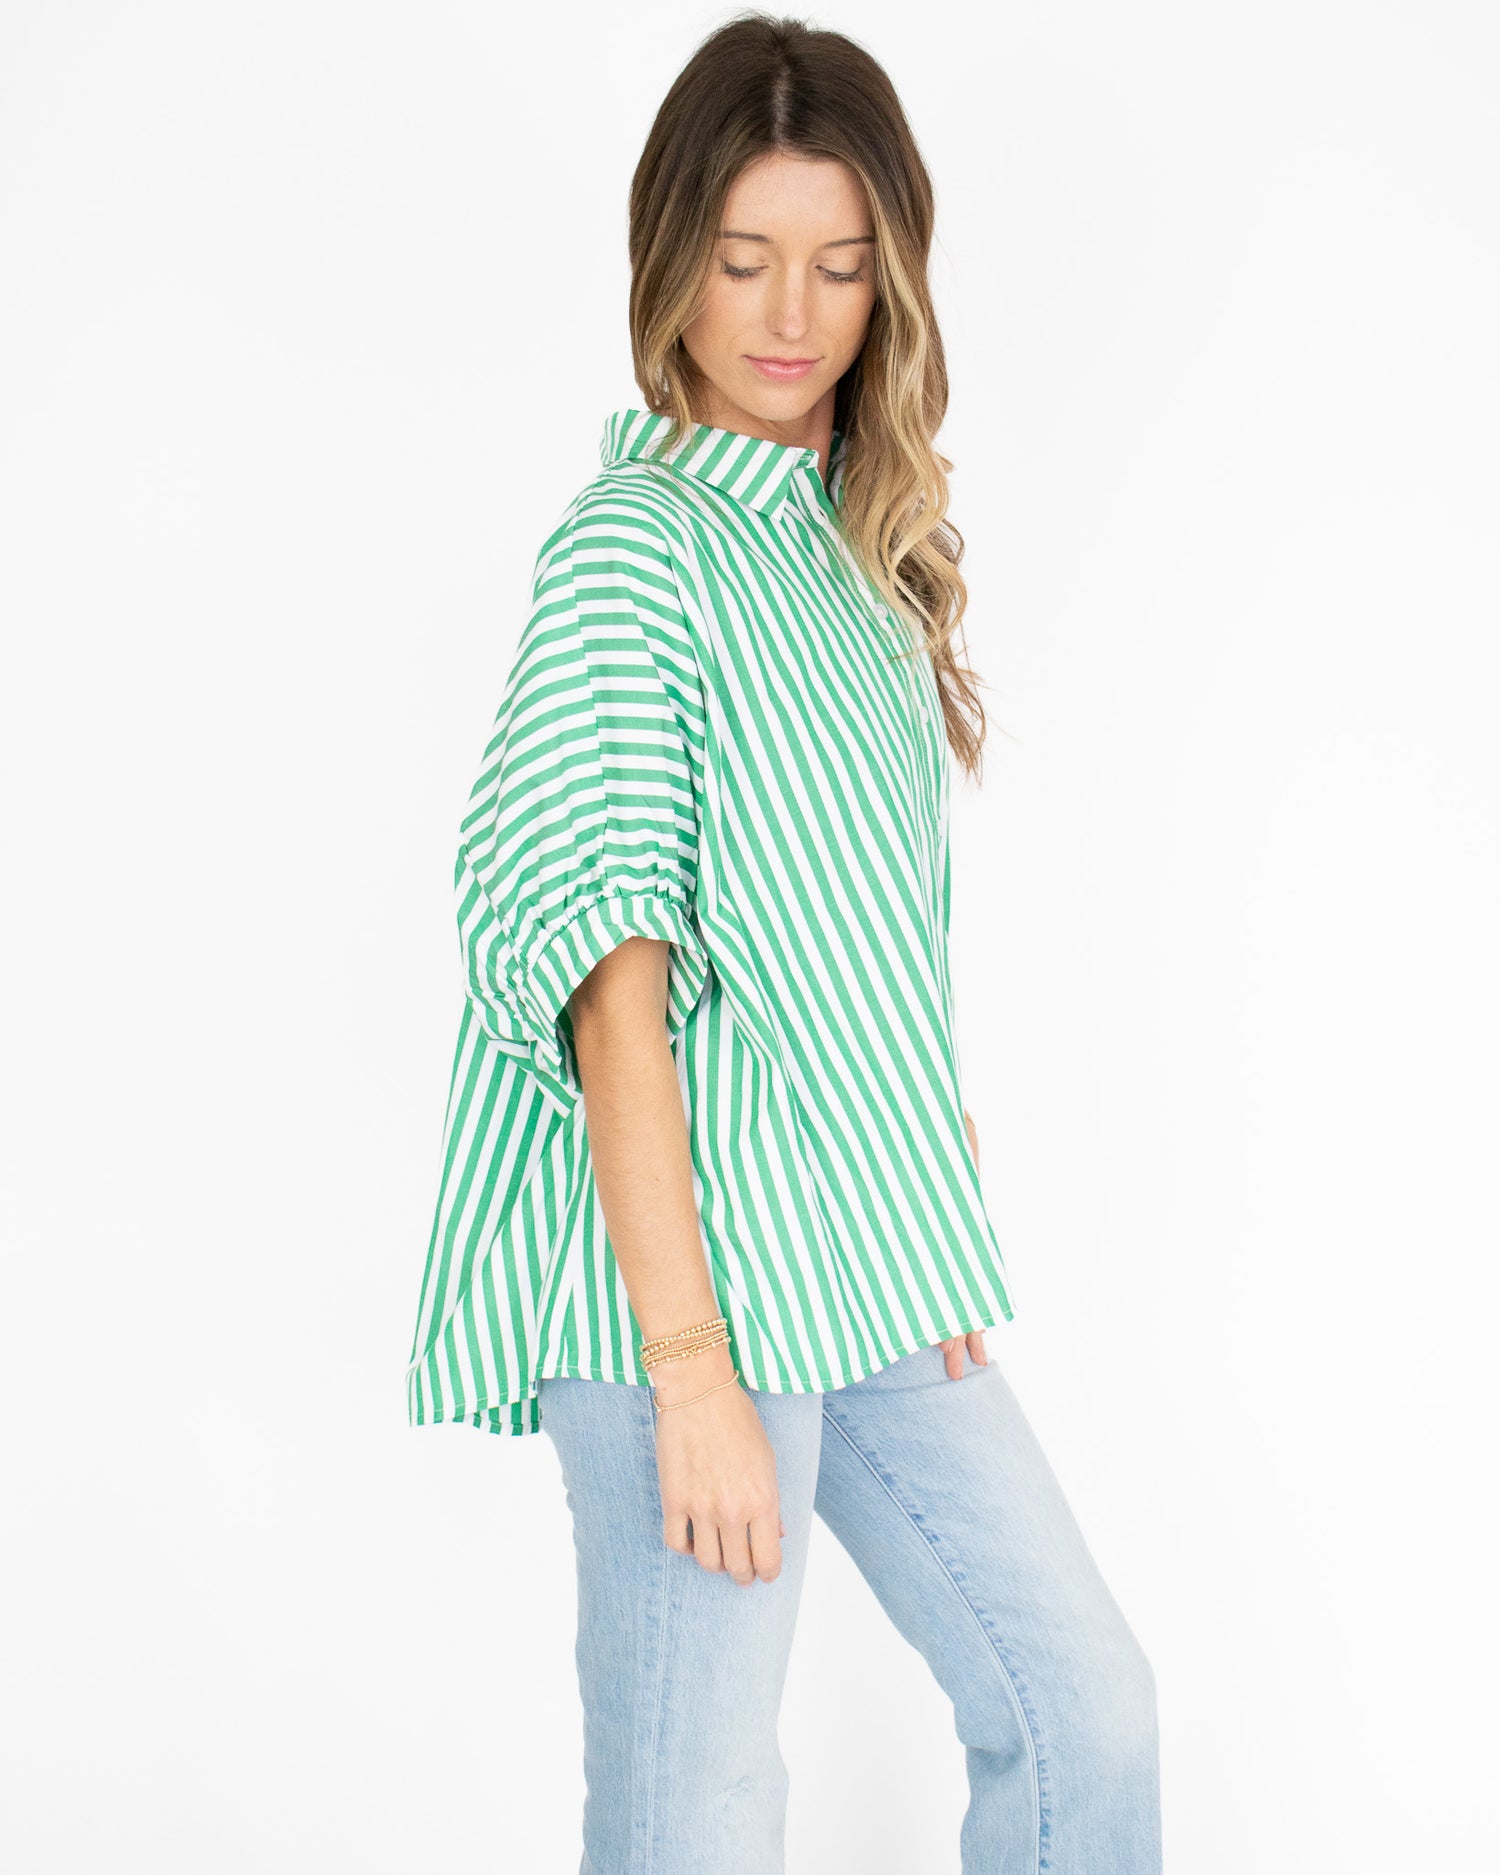 Oversized Striped Button Down - Green